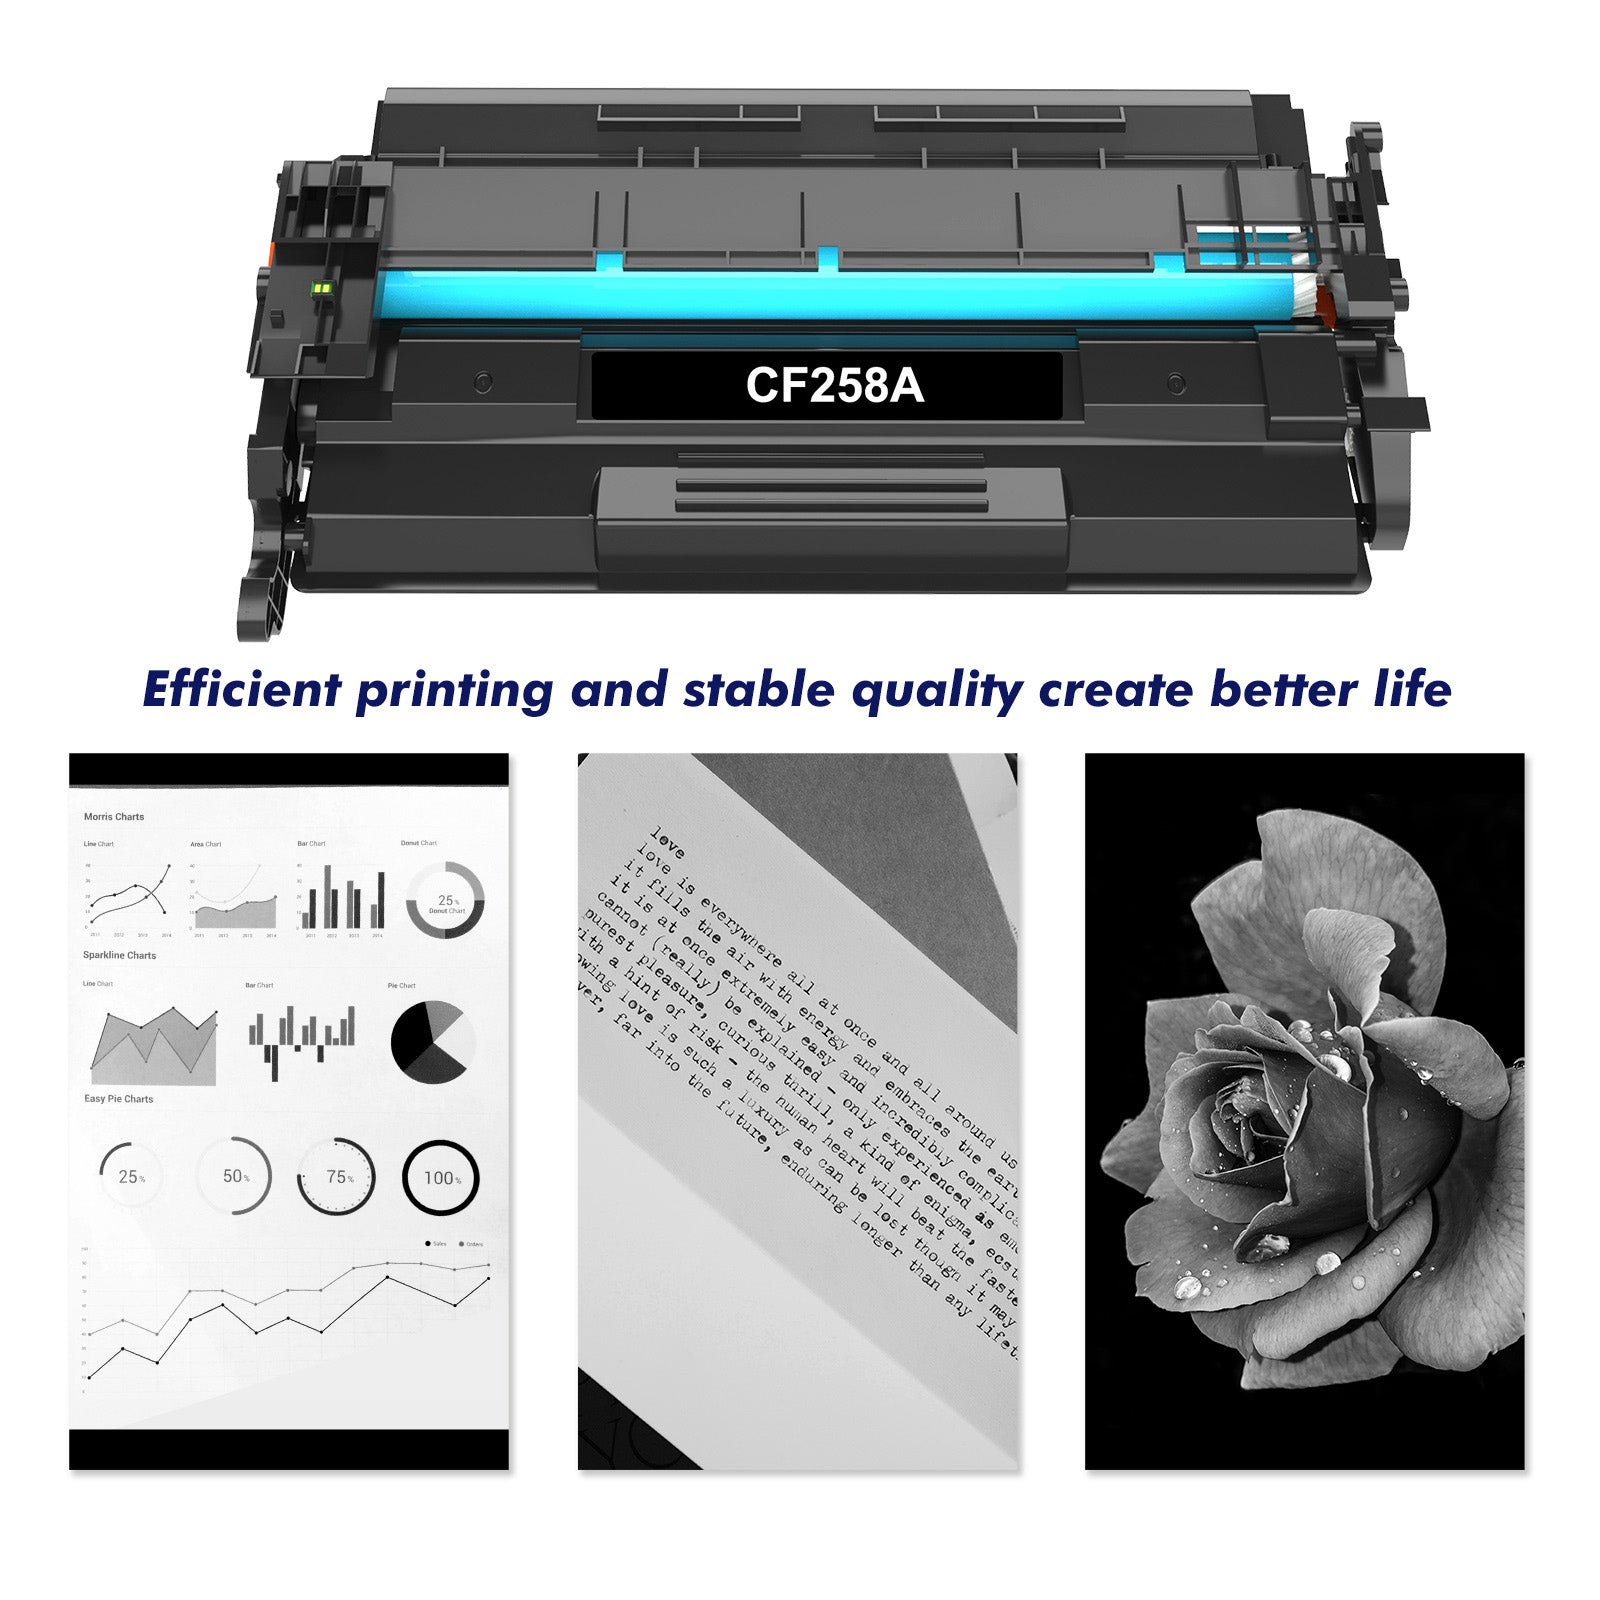 2-pack 58A CF258A Black Toner cartridge with Chip,Compatible with HP 58A CF258A m404 Toner cartridge,for HP Laserjet Pro M404n M404dn MFP M428fdw M428fdn M404dw M428dw Printer